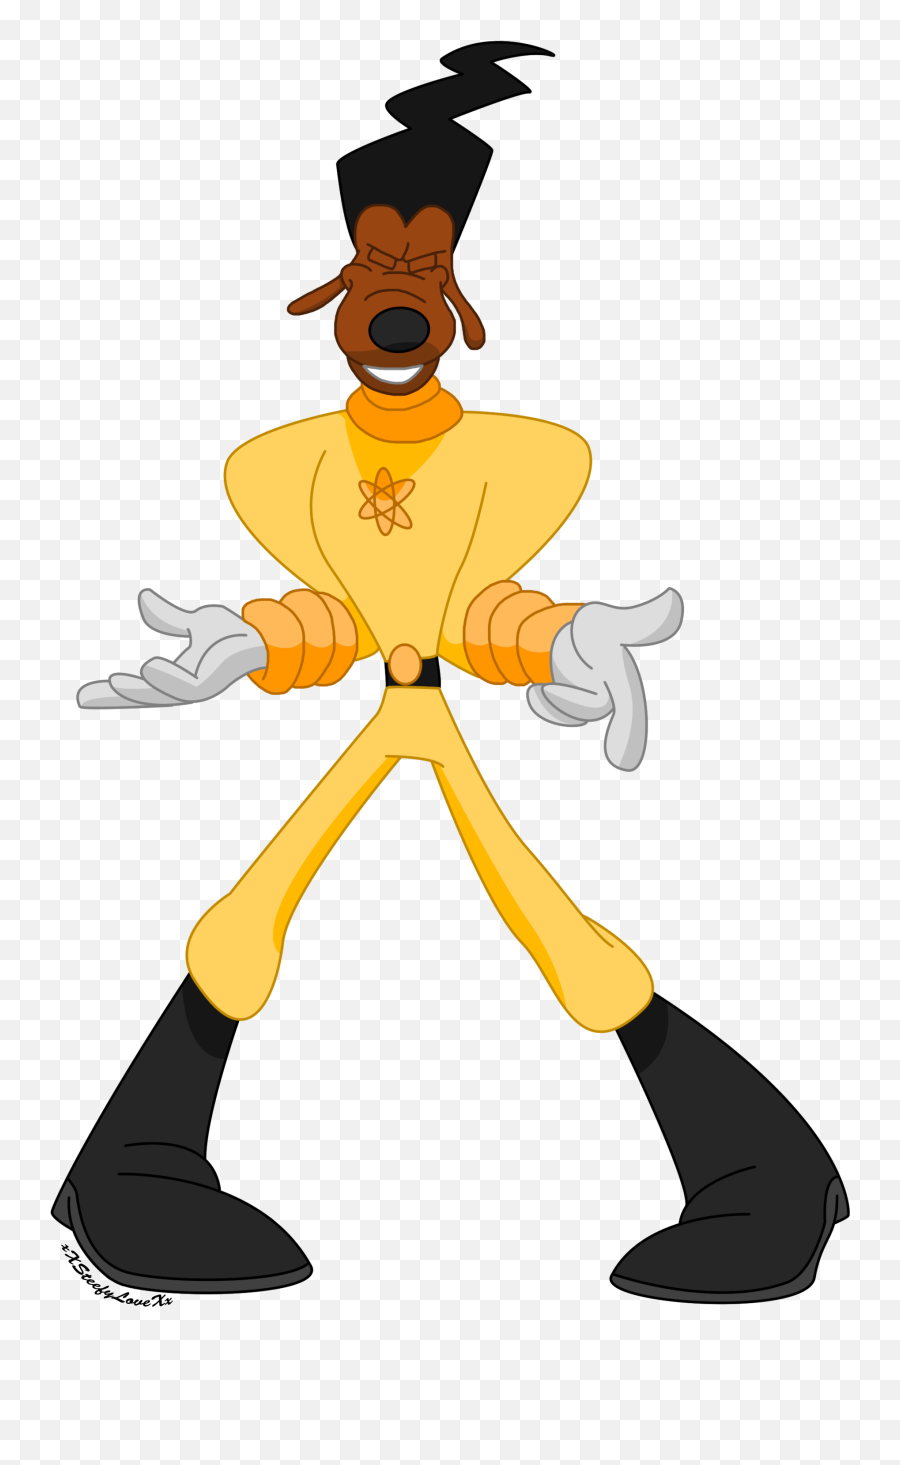 Download Powerline A Goofy Movie 17 By Xxsteefylovexx - Powerline Goofy Movie Emoji,Goofy Emoji